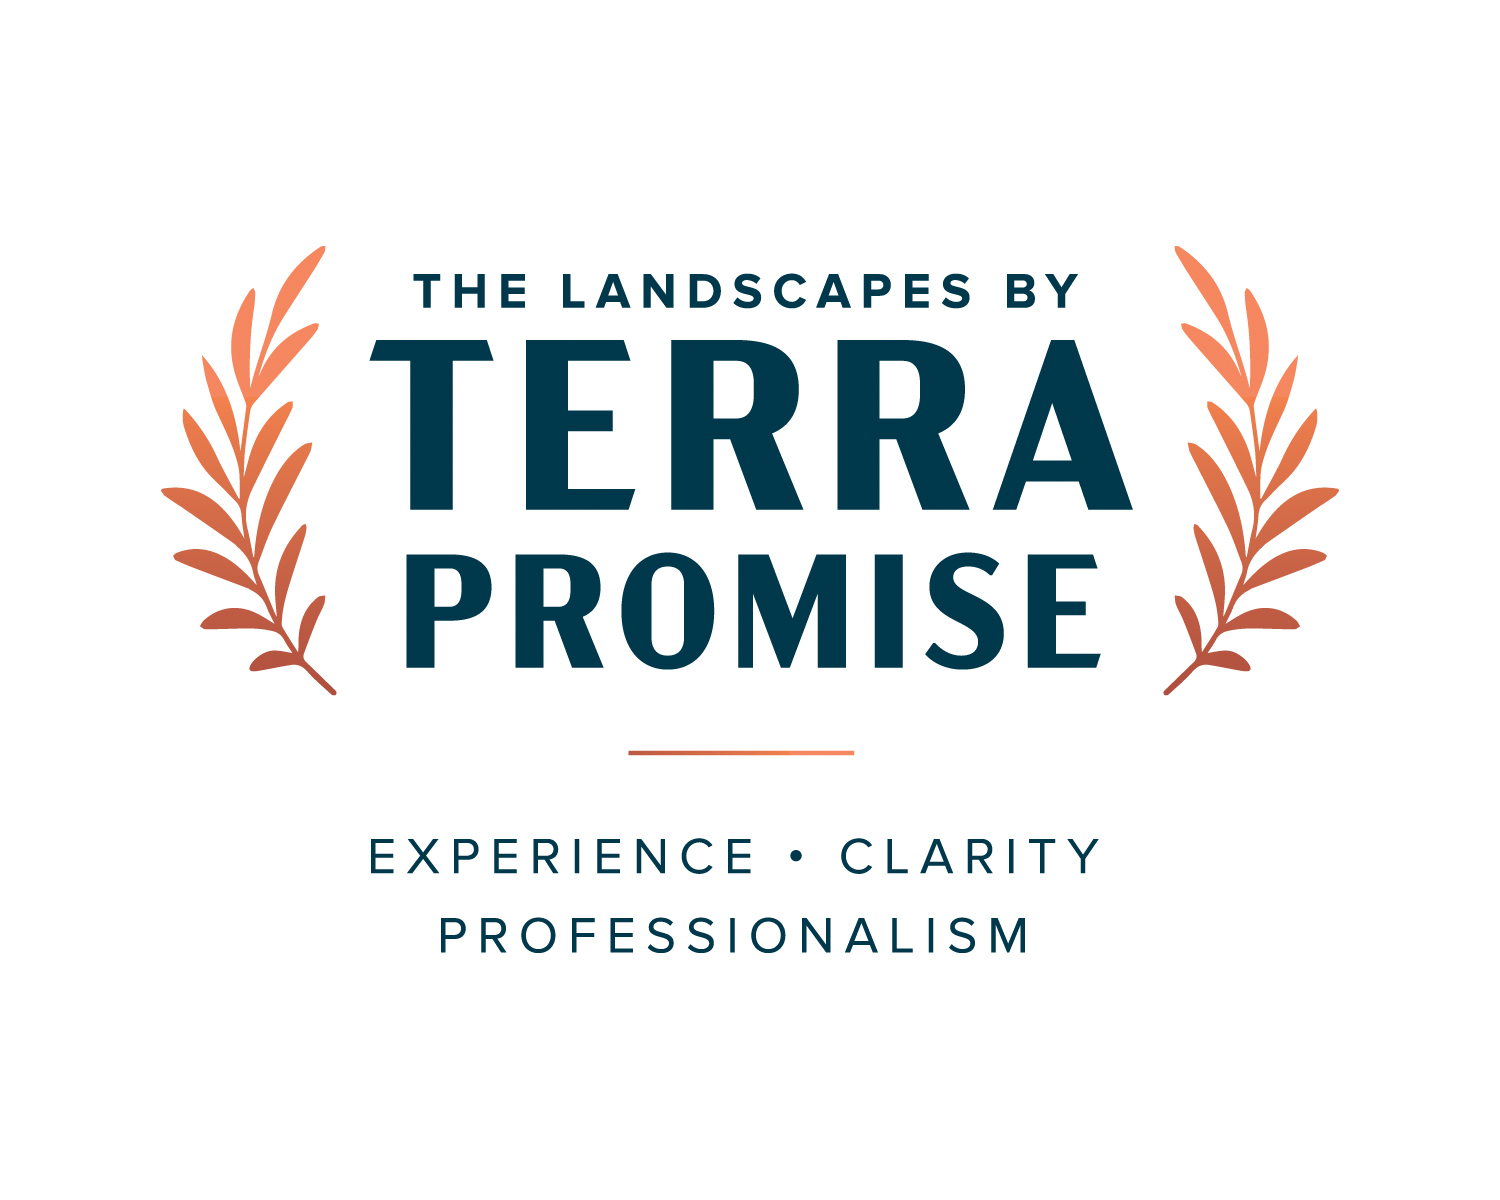 Landscapes by Terra